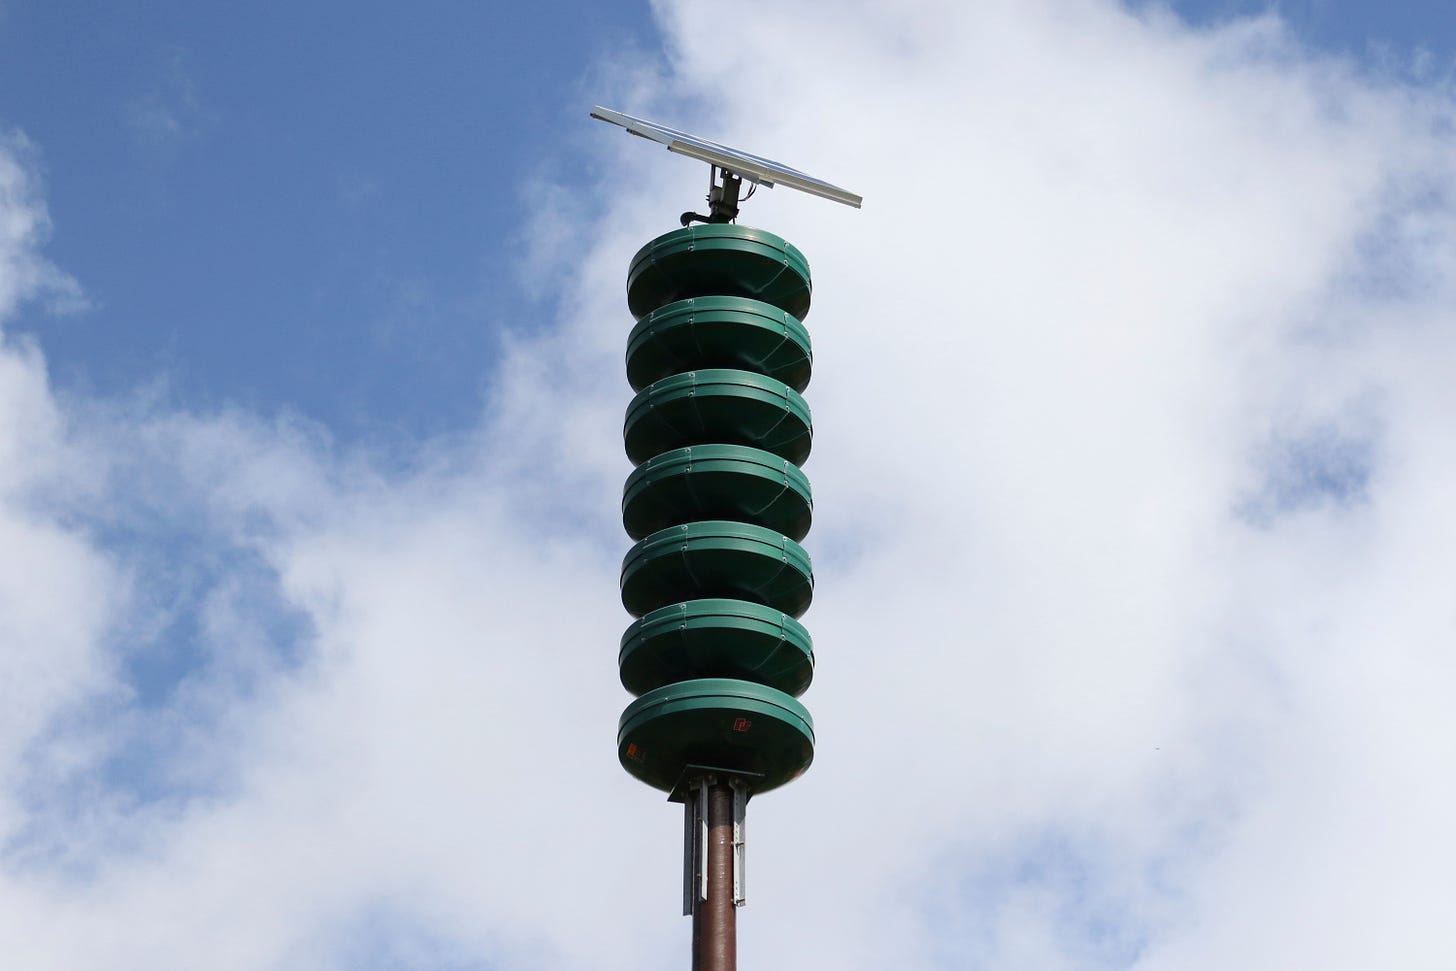 Monthly siren test to be conducted on Wednesday